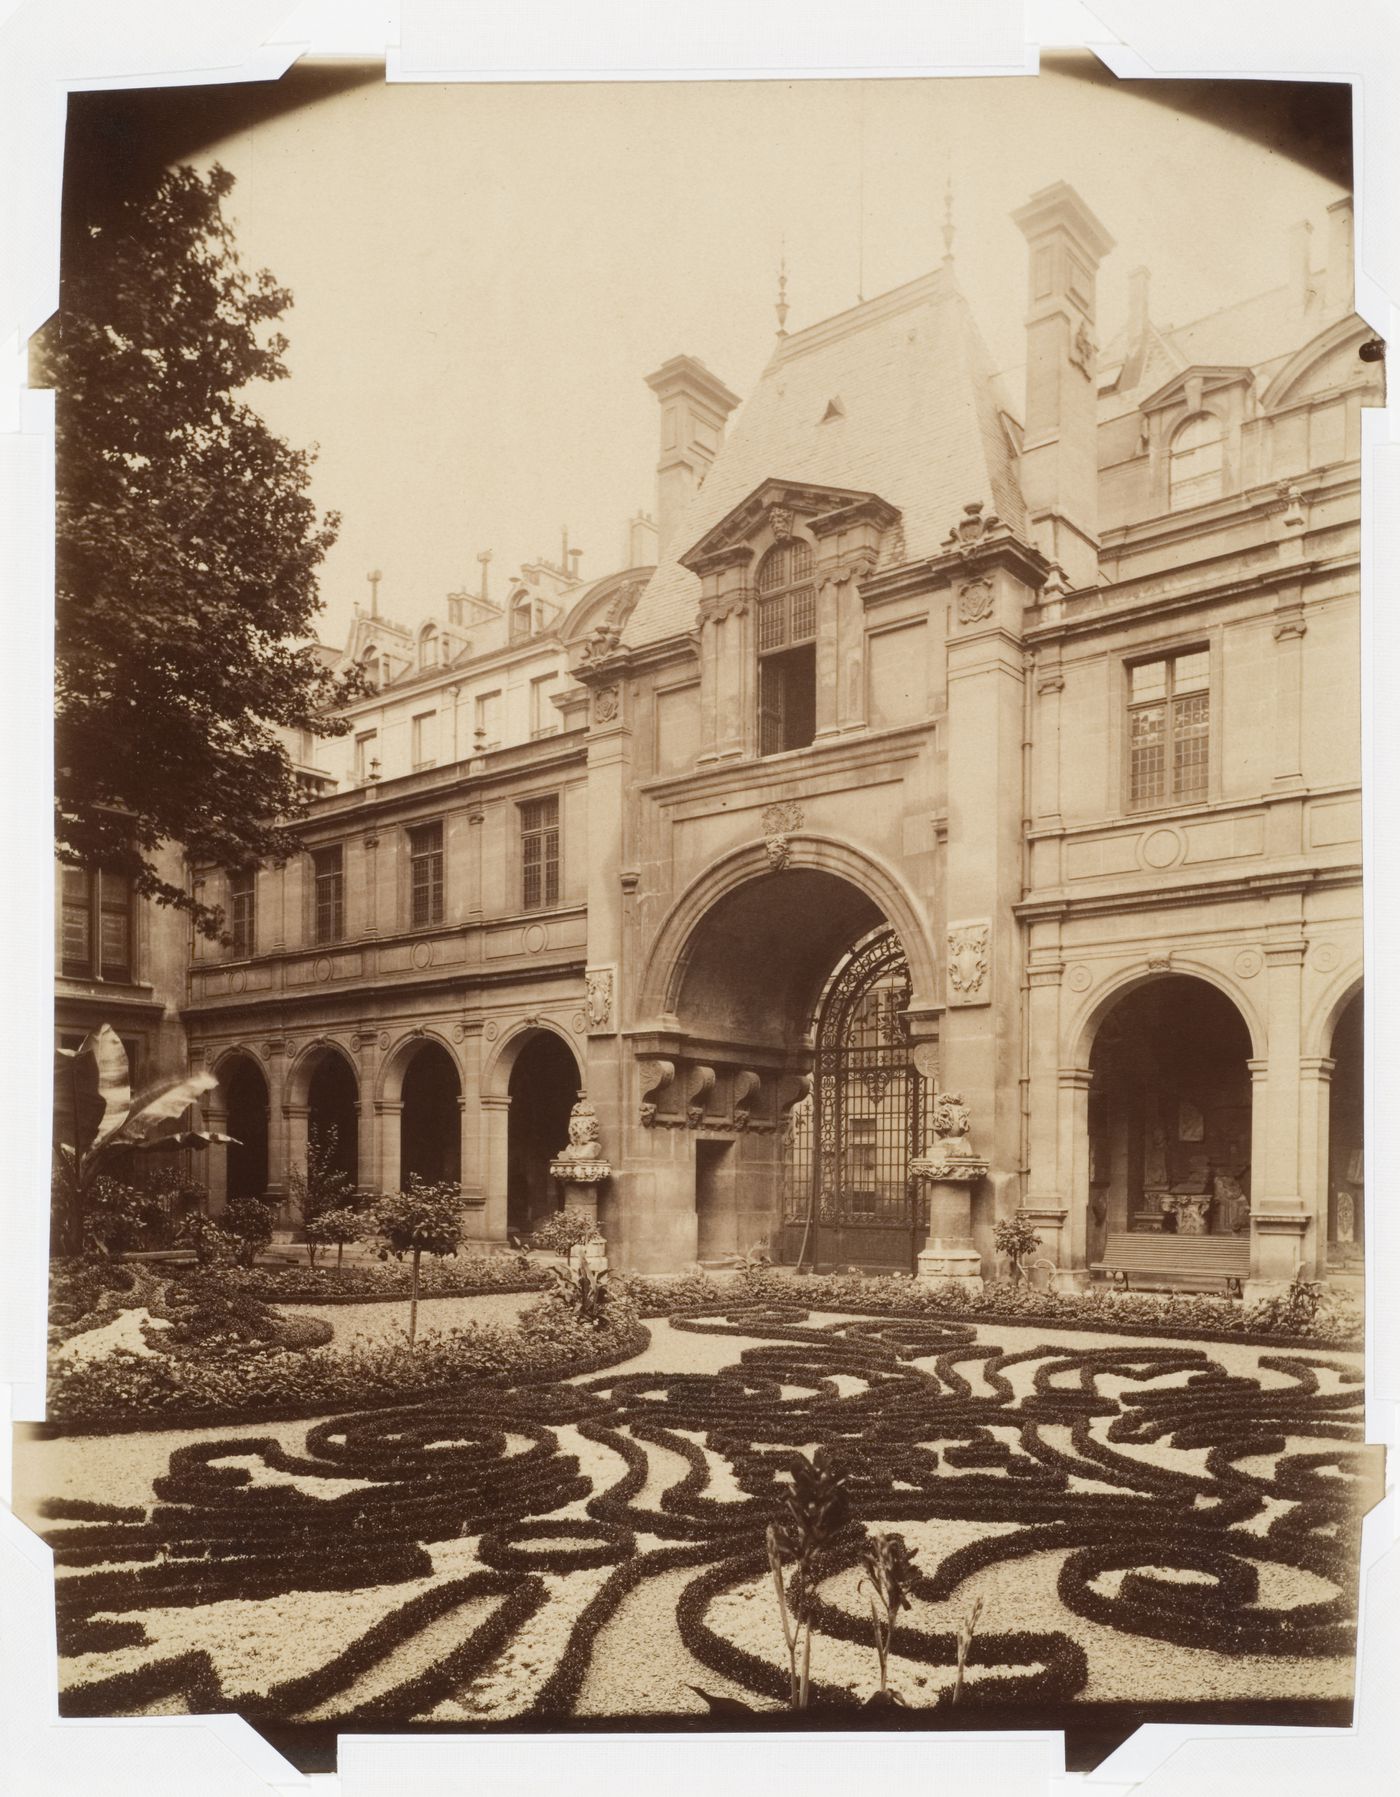 Garden of the Musée Carnavalet, rue des Francs-Boigeois, looking toward the 16th century arch of Nazareth, from the north, Paris, France